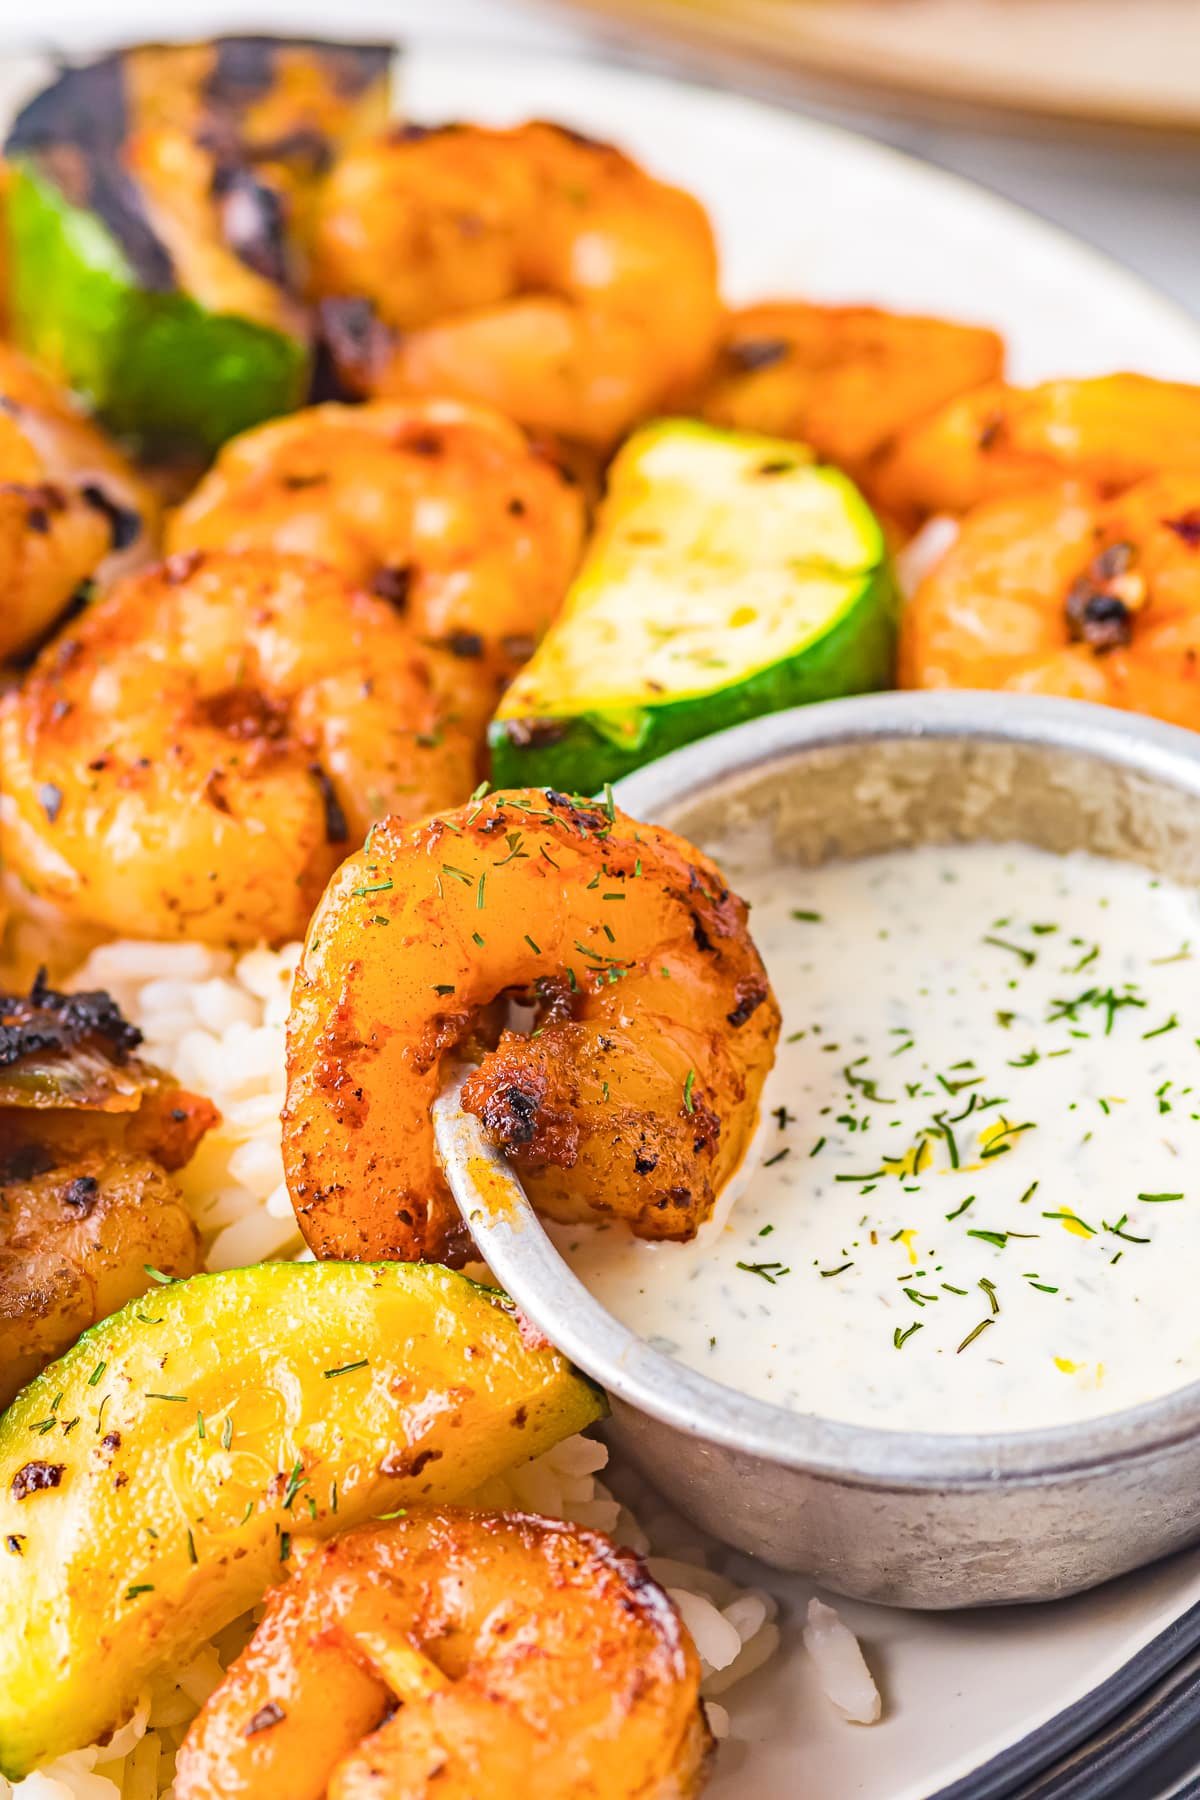 a shrimp from grilled shrimp skewers dipped in dill sauce